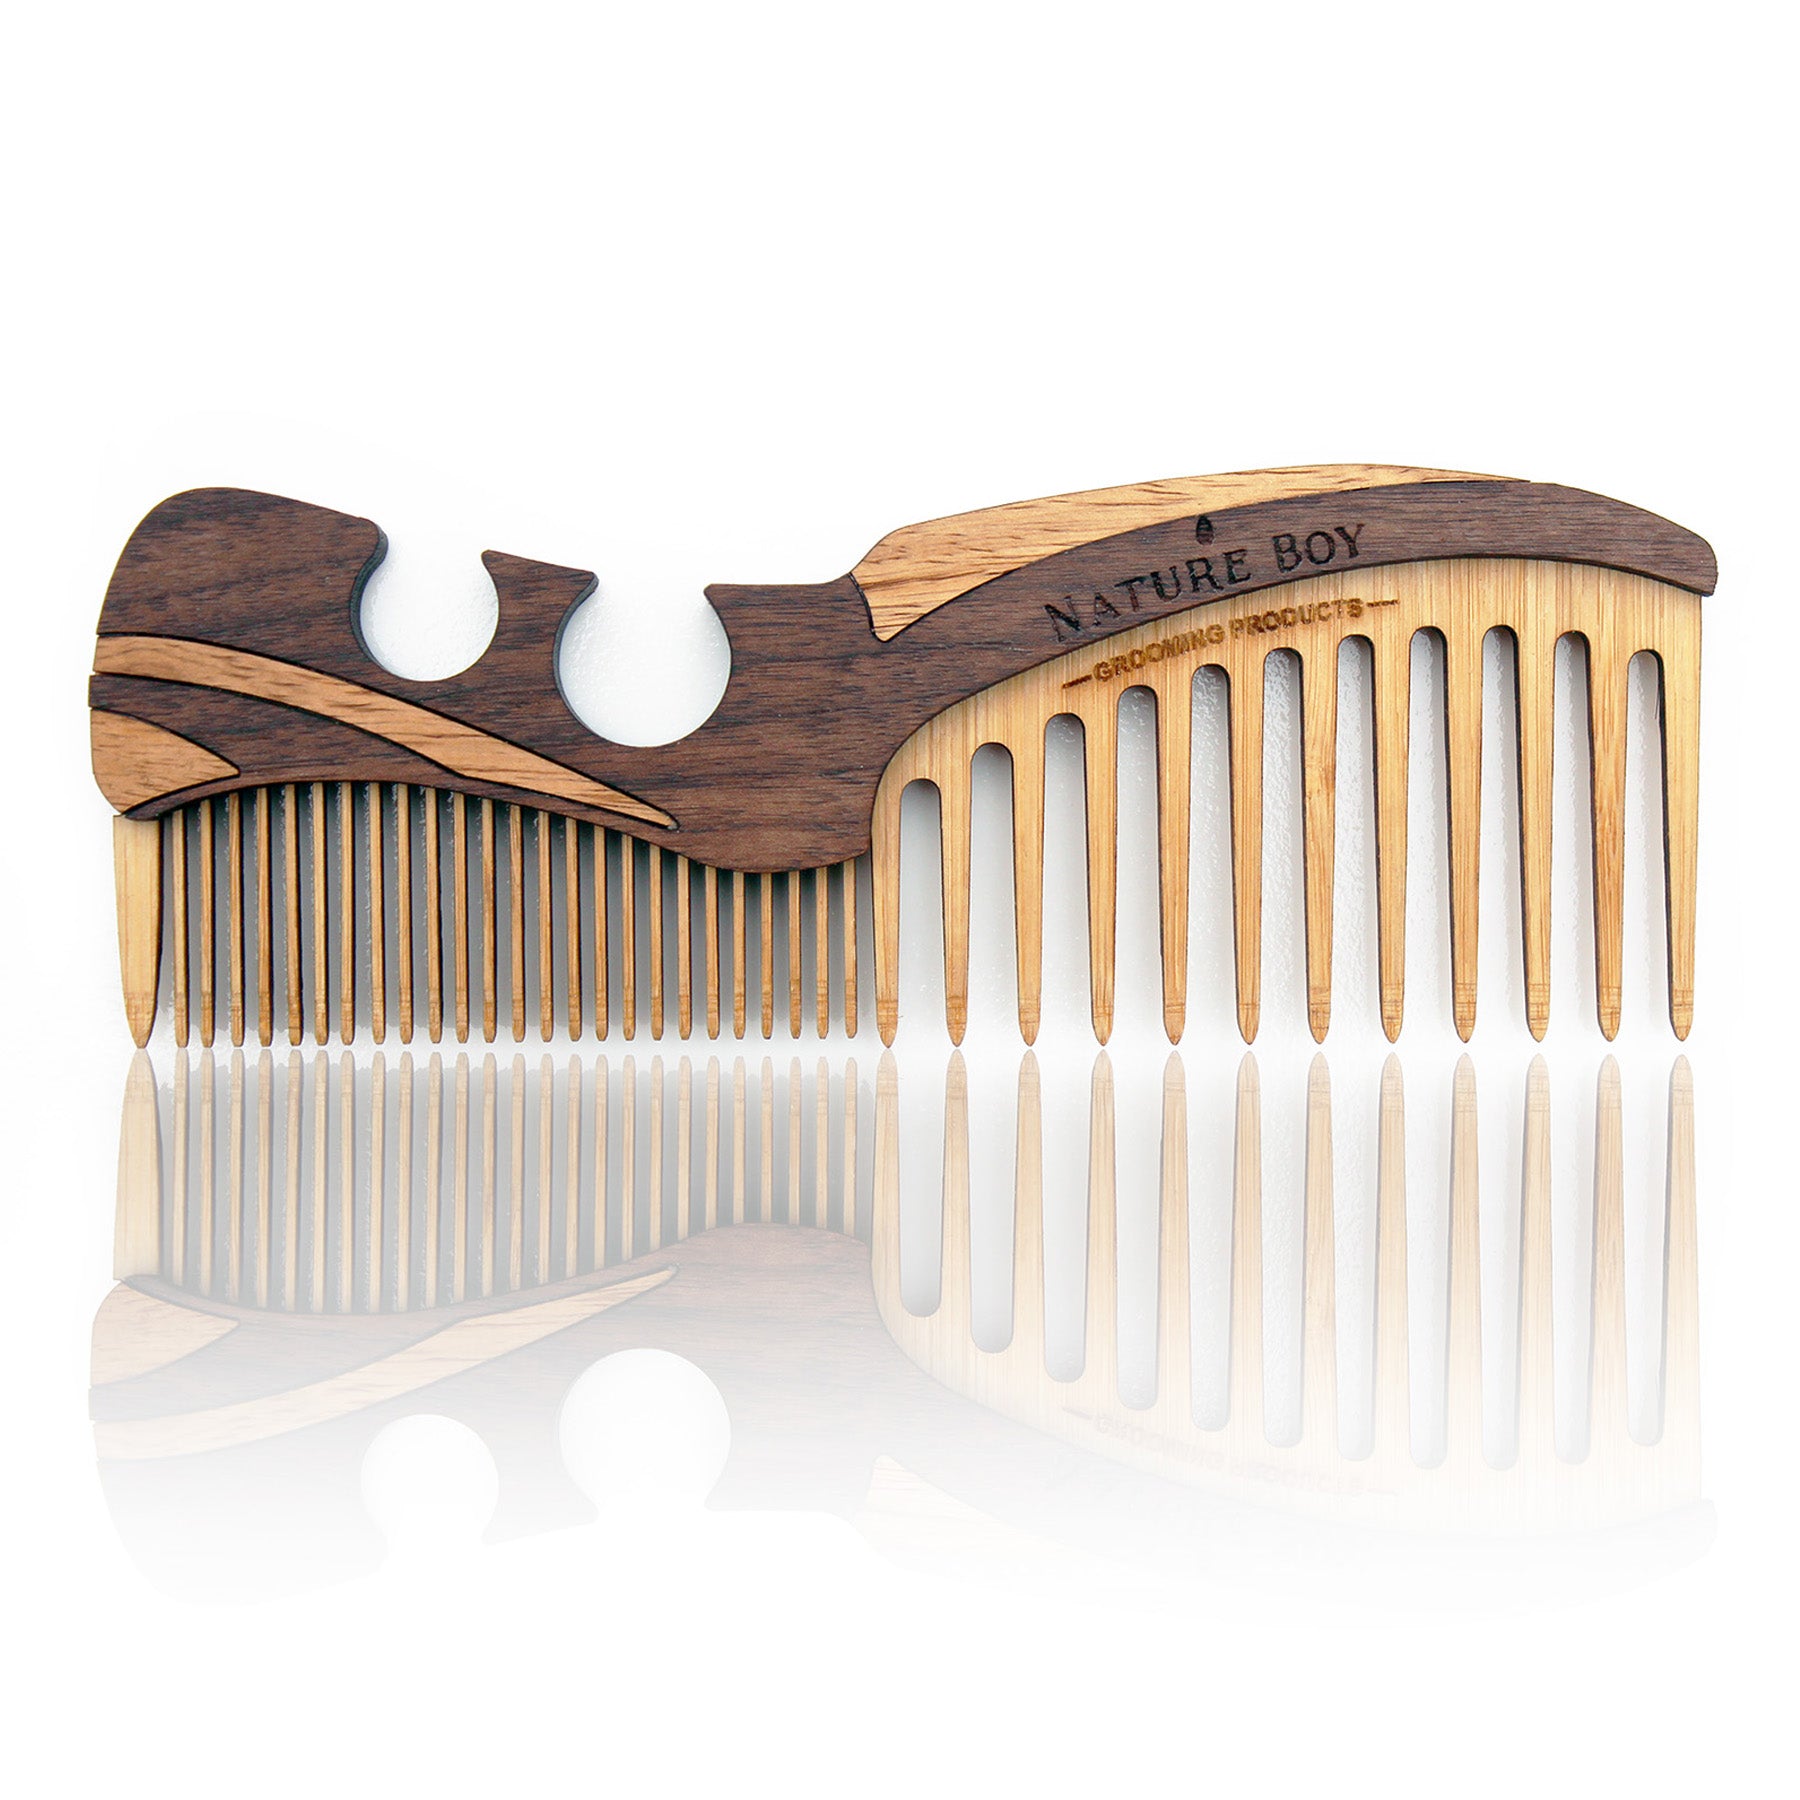 NATURE BOY Grooming Products Wooden Beard Comb _ 